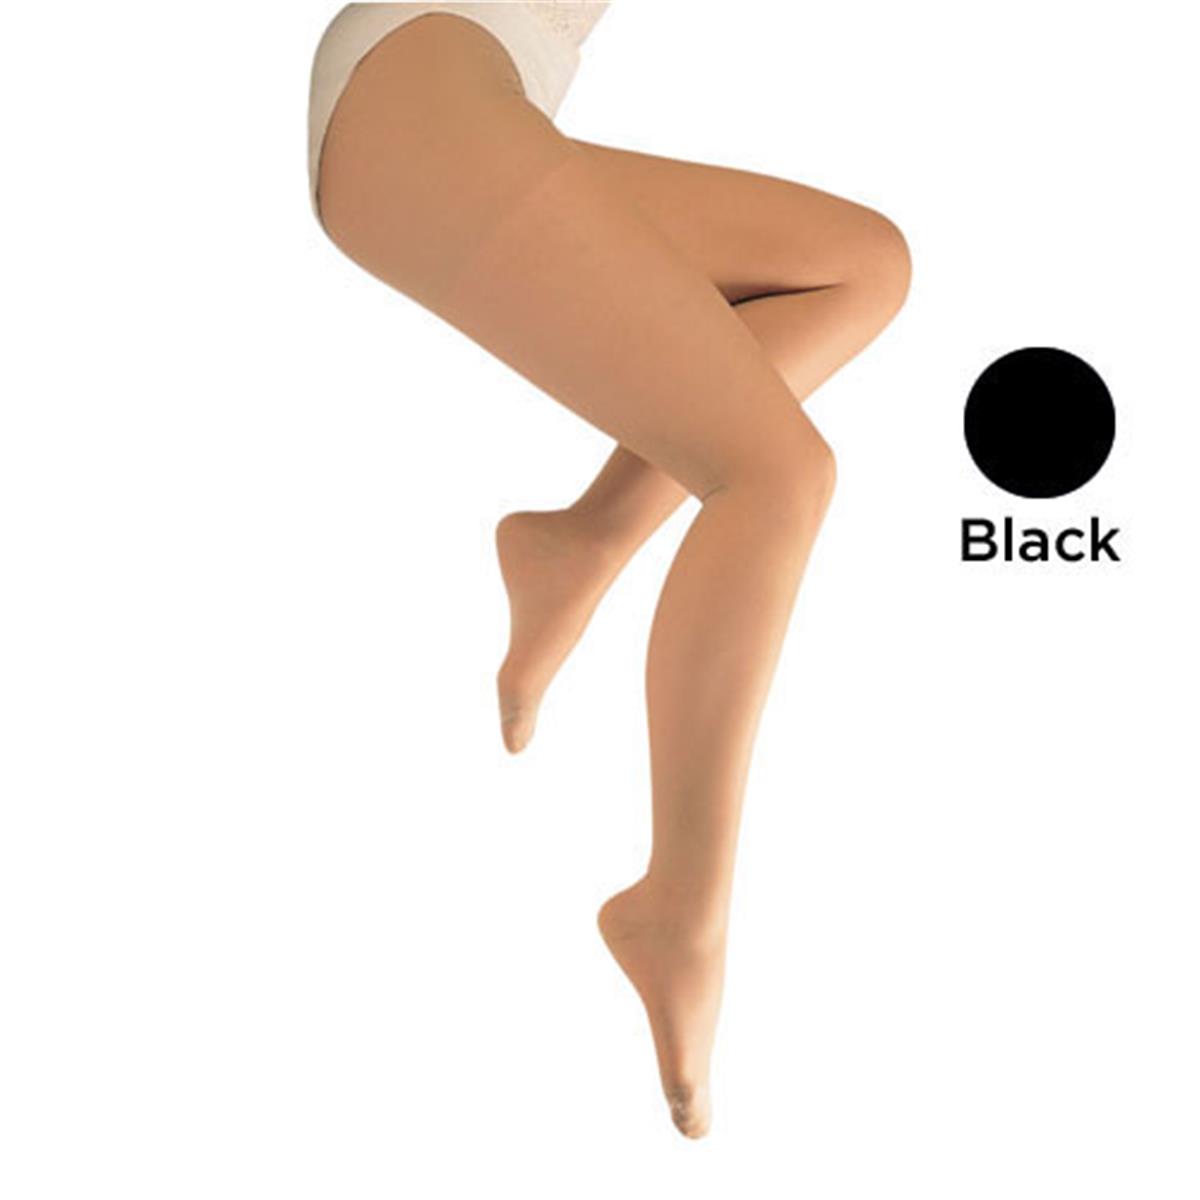 Picture of Blue Jay BJ365BLQP Ladies Sheer Firm Support 20-30 mmHg Panty Hose, Black - Queen Plus Size